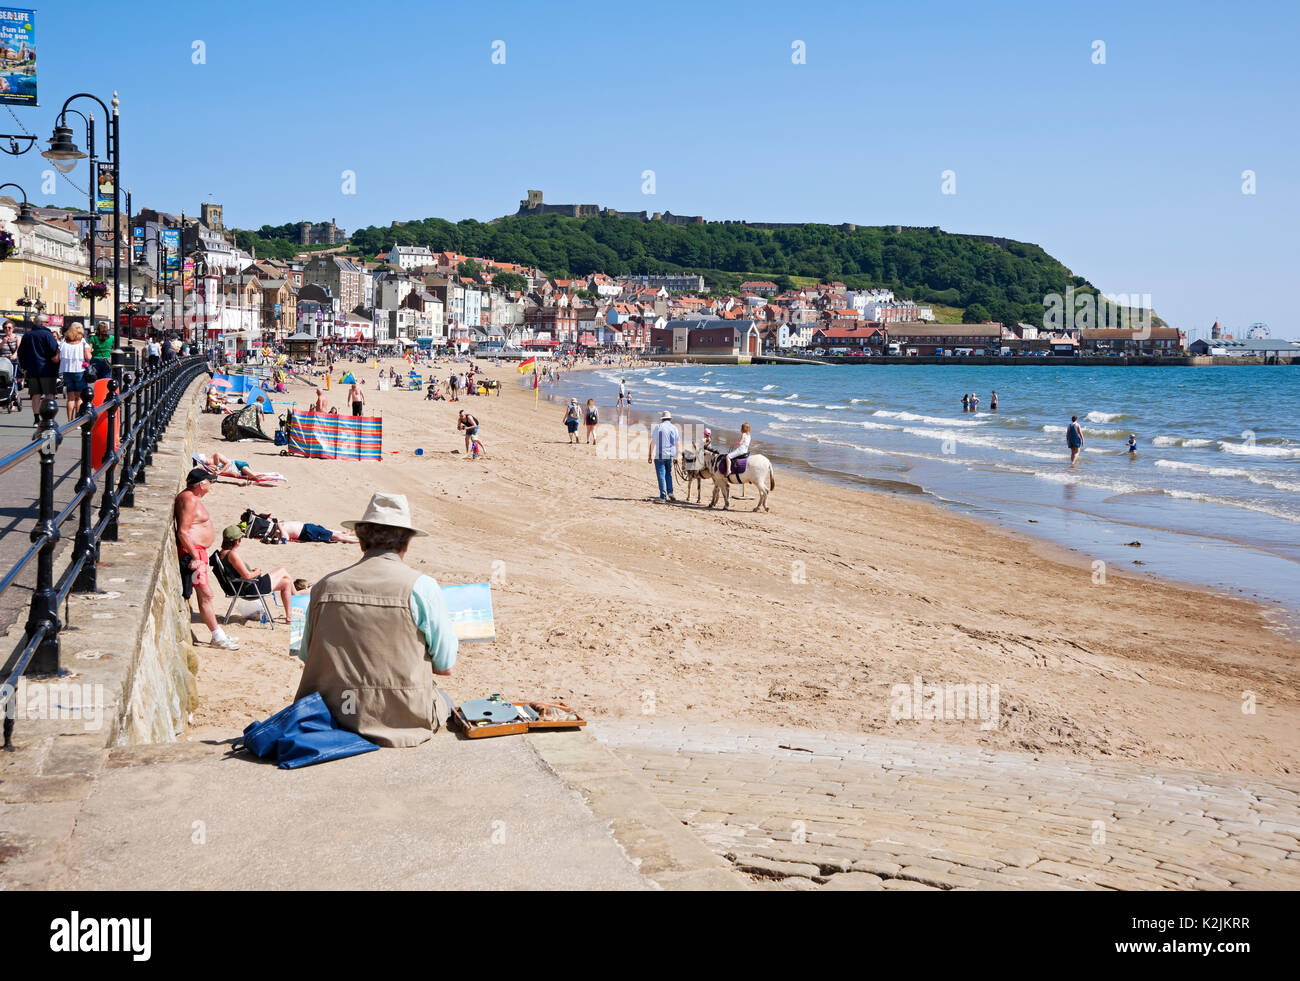 People tourists visitors on the beach in summer South Bay Scarborough North Yorkshire England UK United Kingdom GB Great Britain Stock Photo